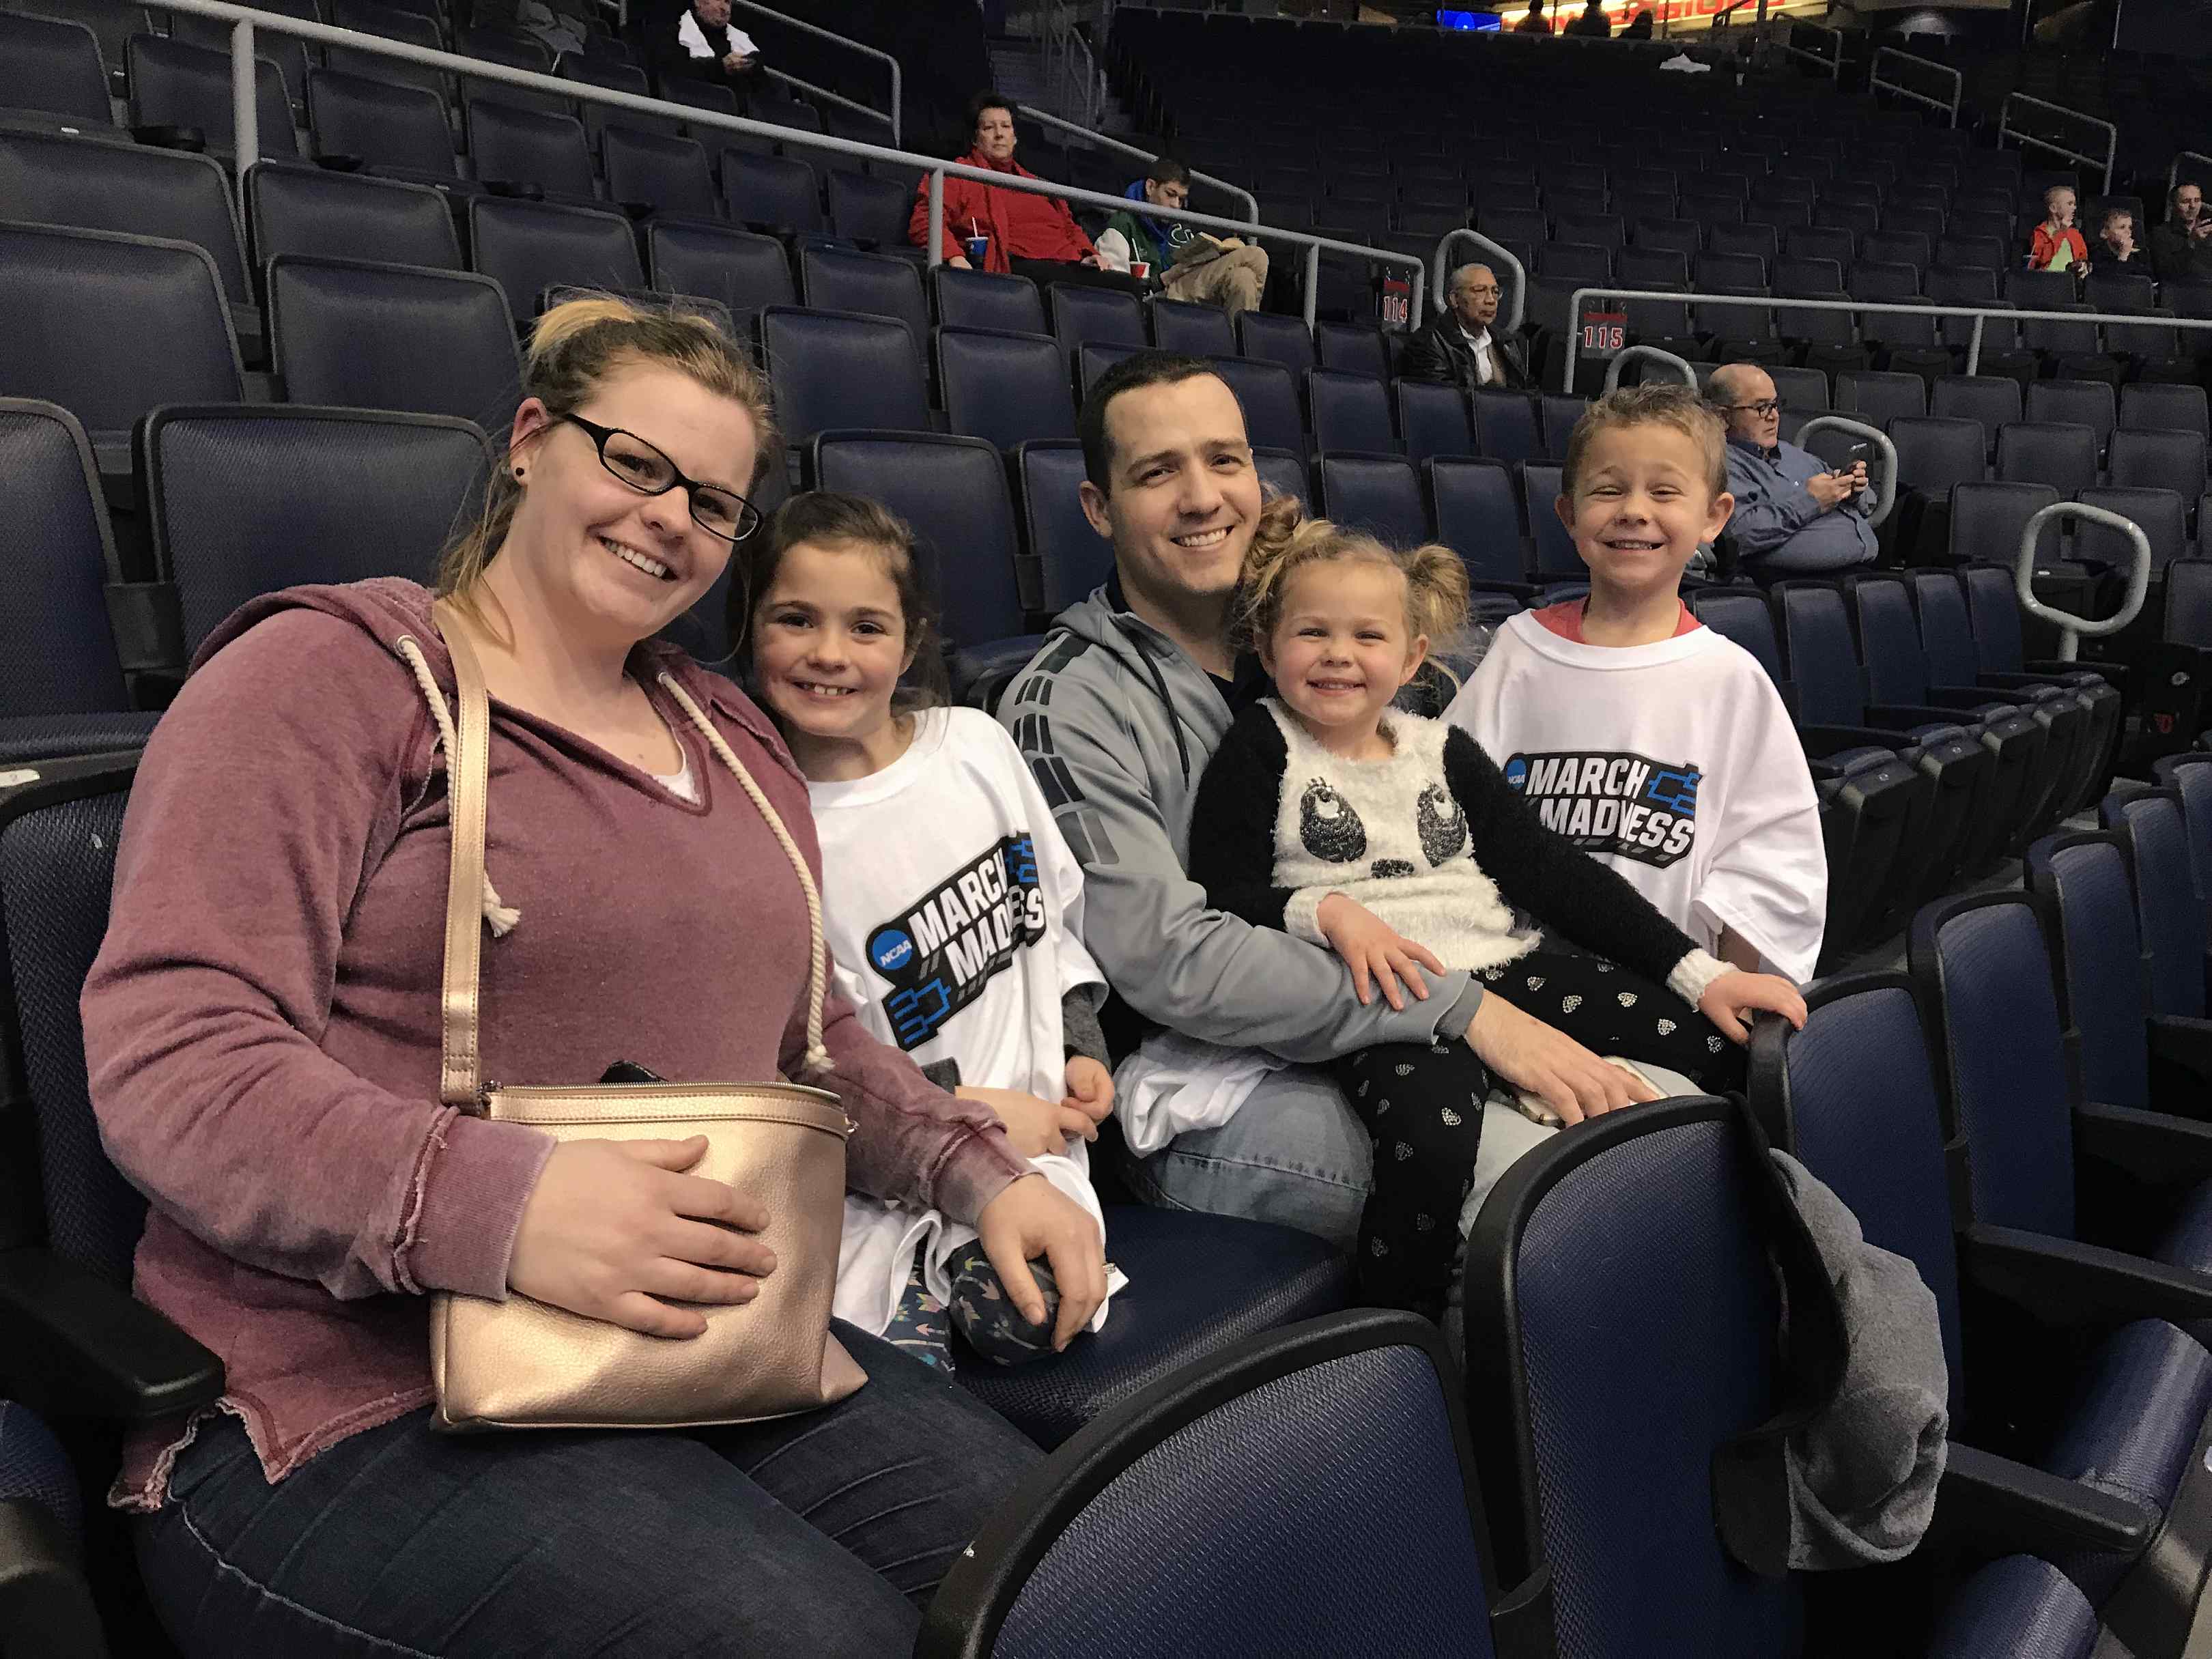 The Peterson family enjoys the First Four at UD Arena.